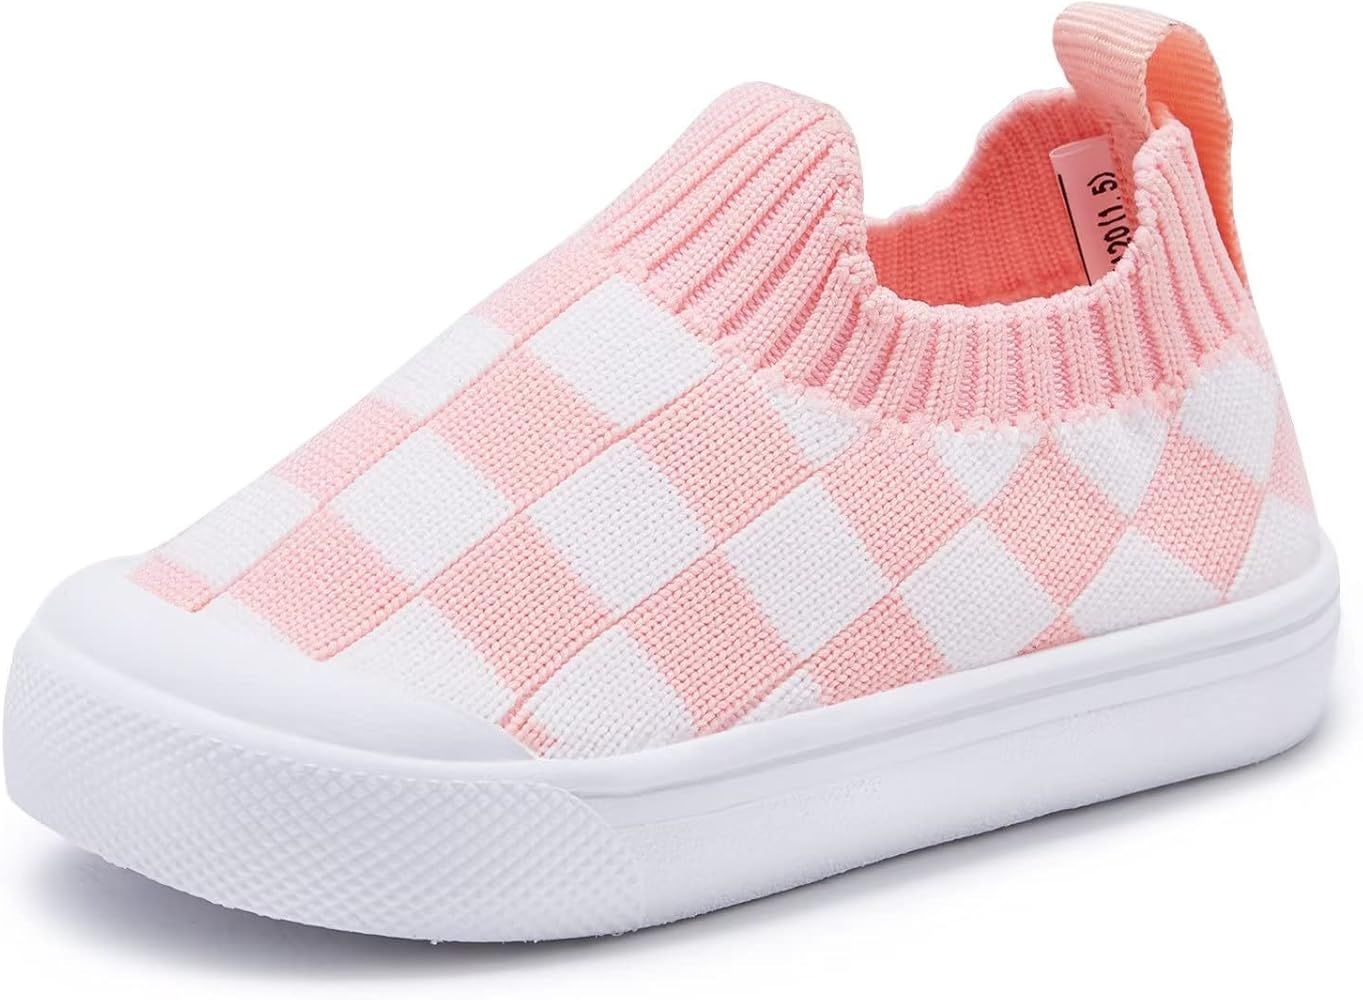 BMCiTYBM Baby Sneakers Girls Boys Lightweight Breathable Mesh First Walkers Shoes 6-24 Months | Amazon (US)